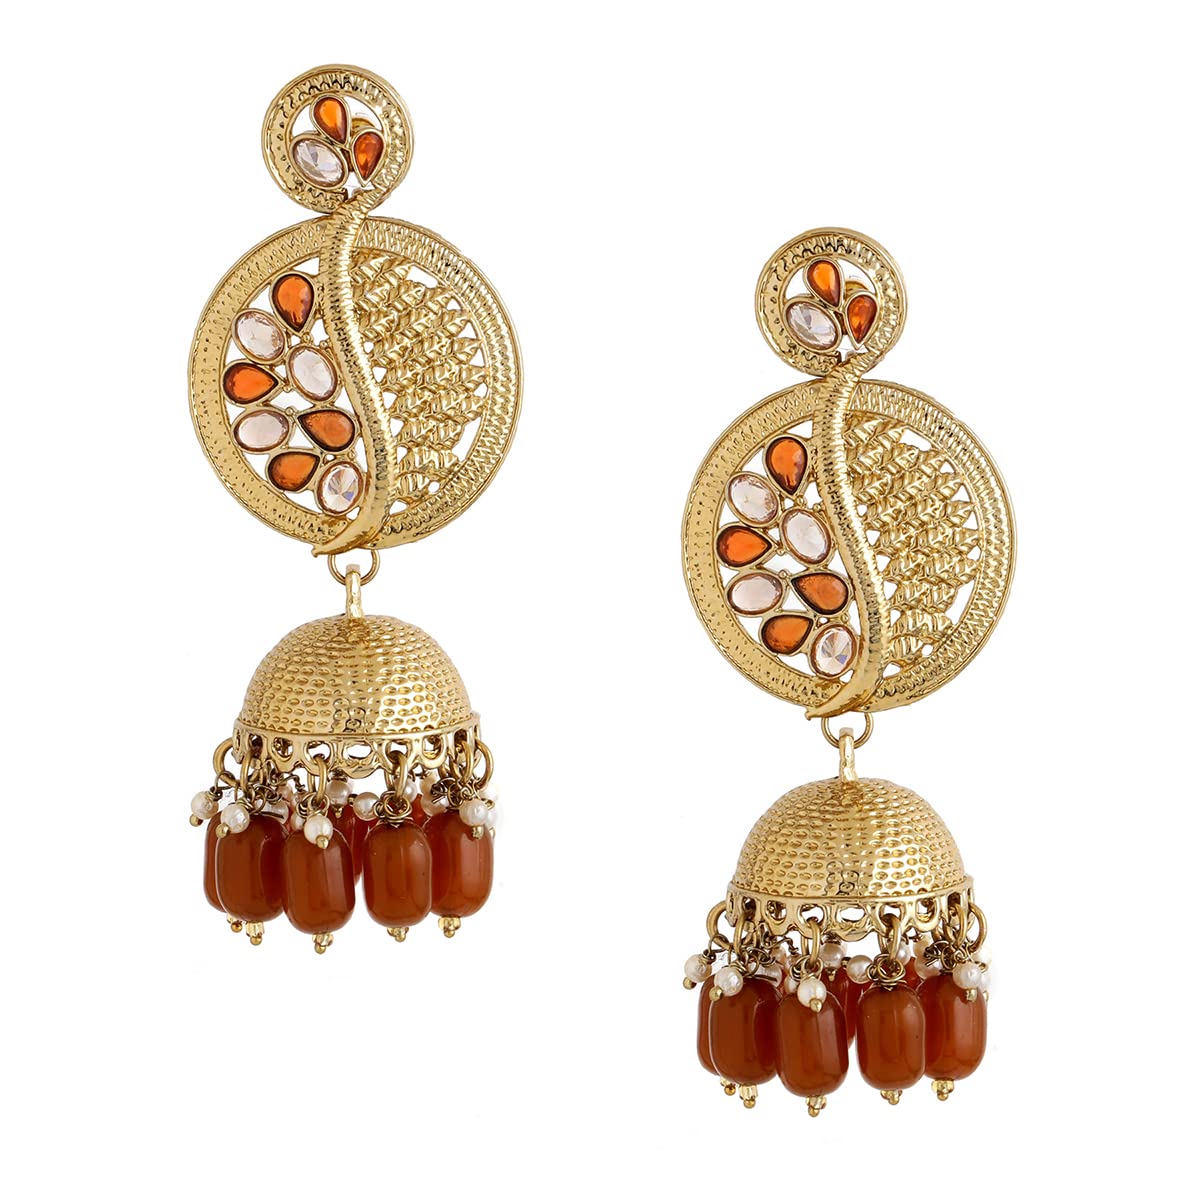 Yellow Chimes Earrings for Women and Girls Traditional Kundan Studded Jhumka | Gold Plated | Kundan Stone Jhumki Earrings | Birthday Gift for girls and women Anniversary Gift for Wife